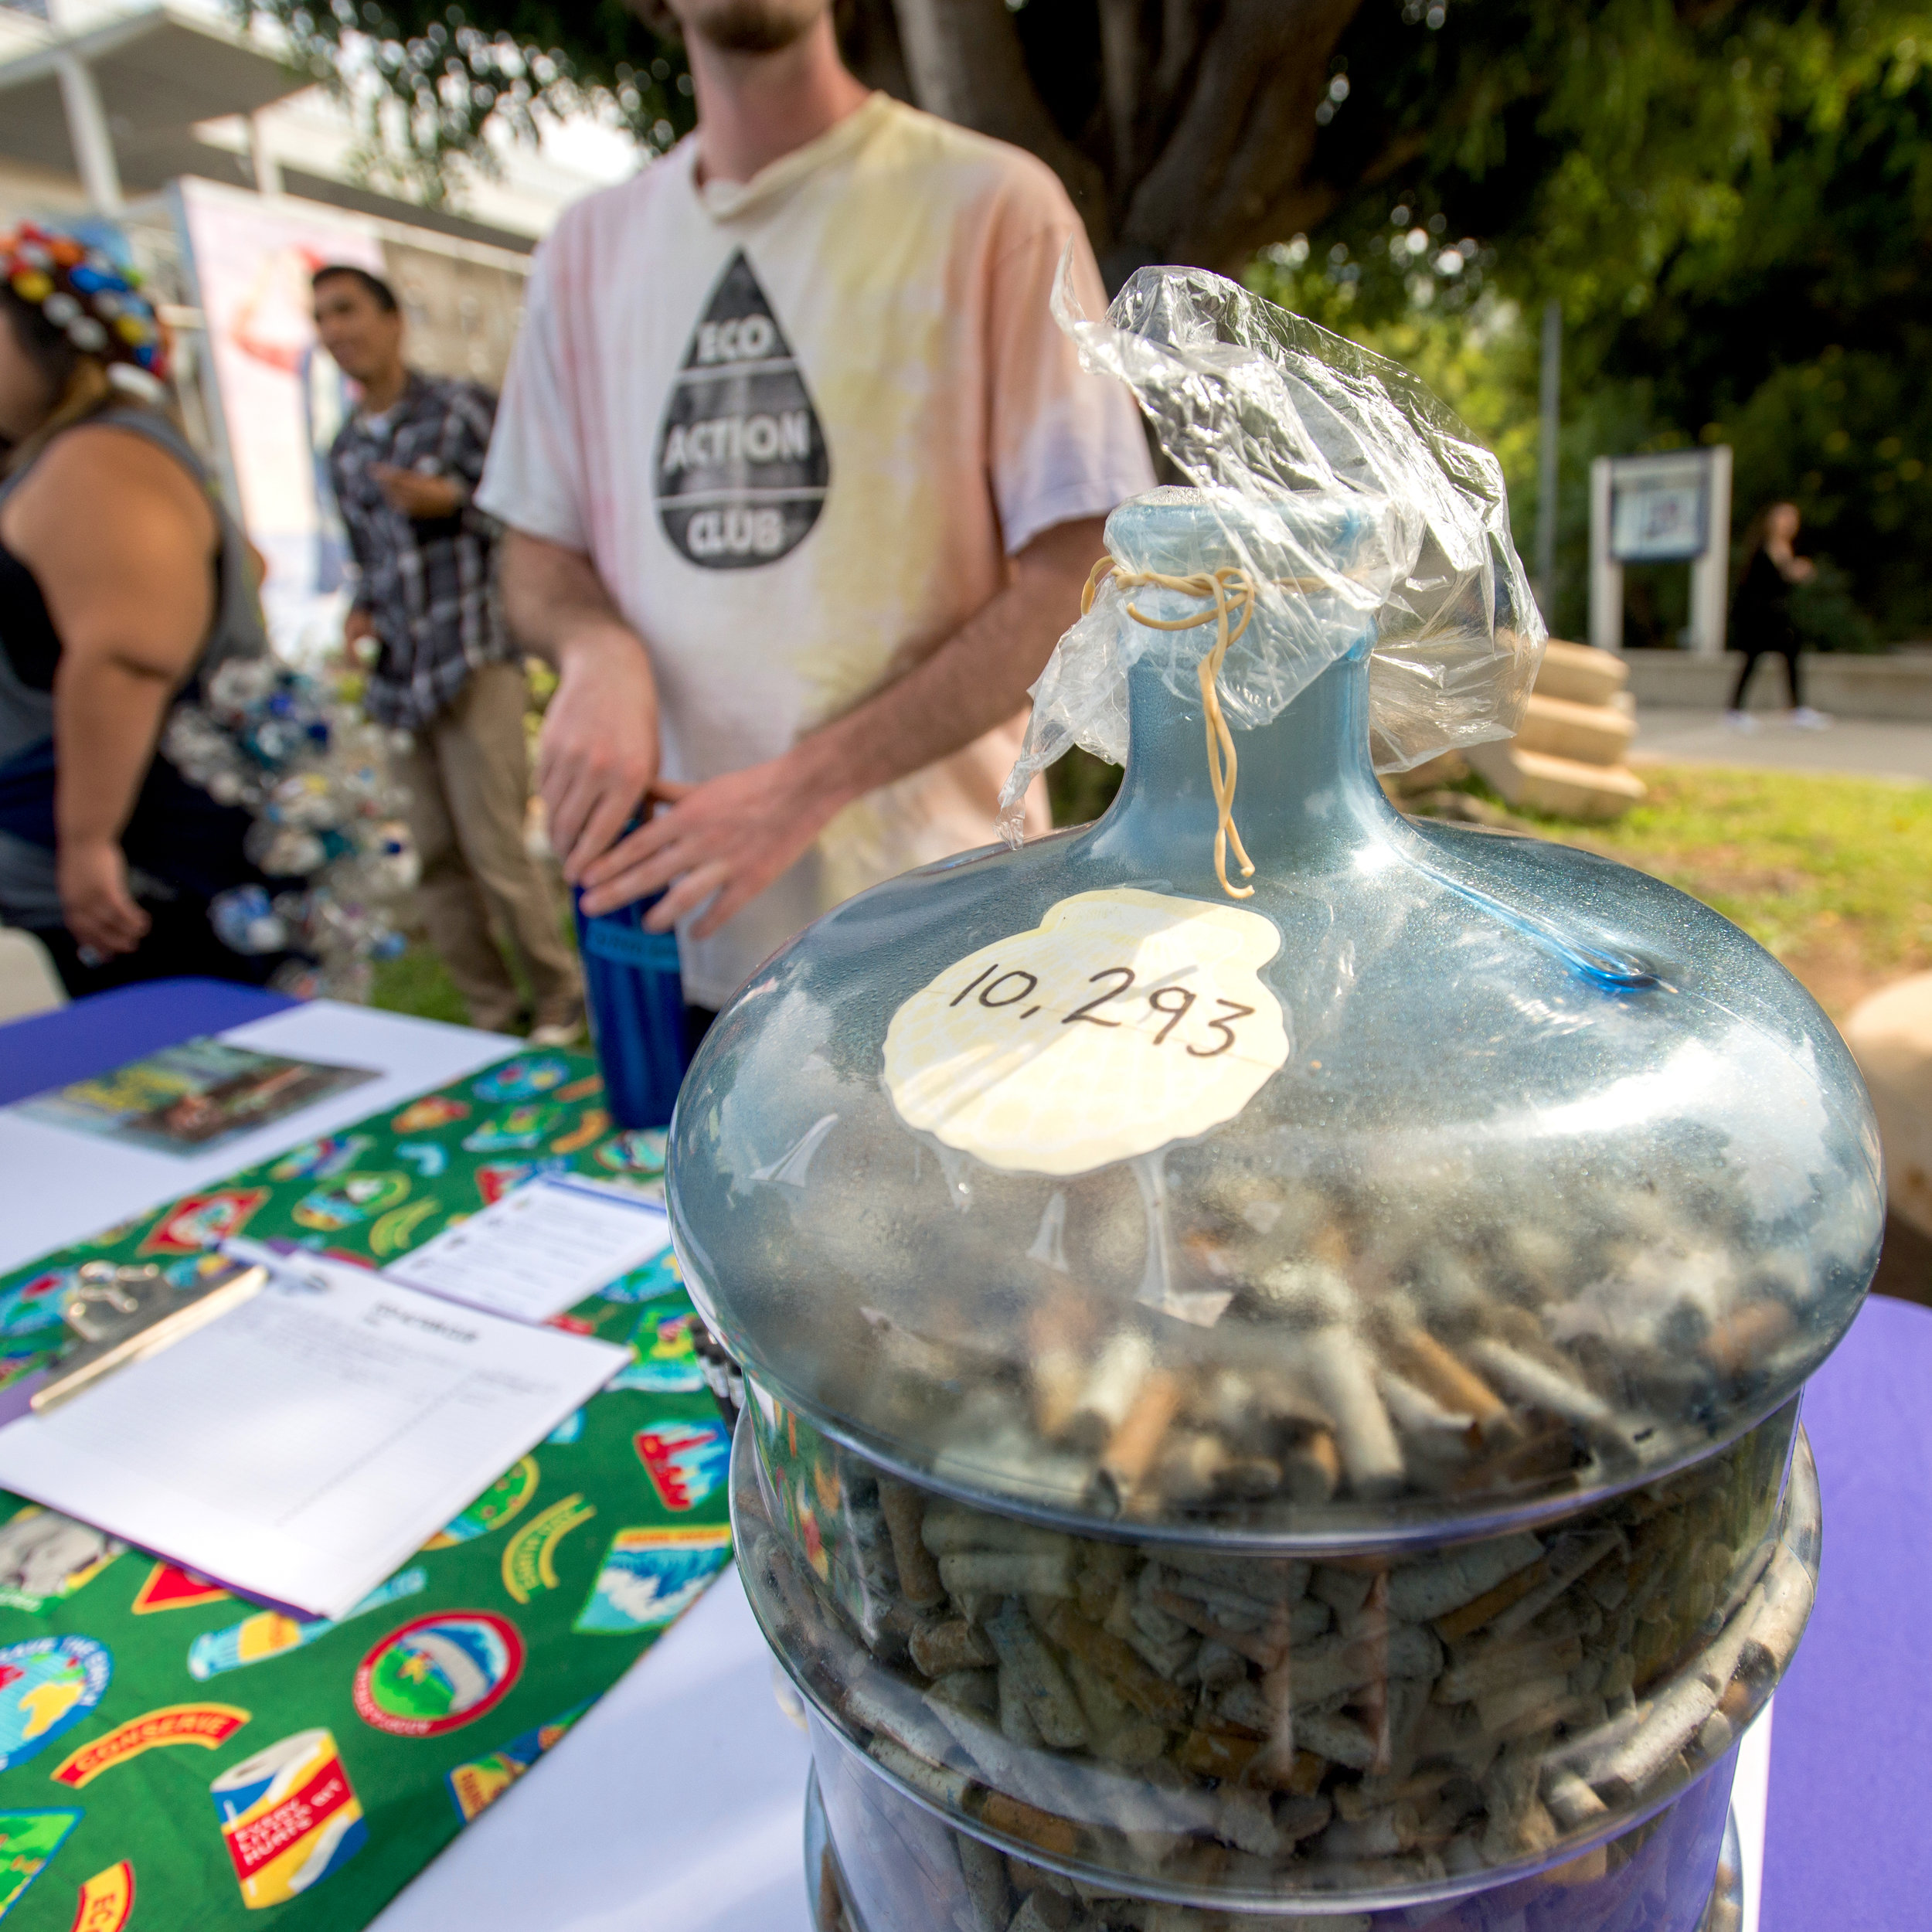  The Eco Action Club displays a water gallon container with the number of cigarette buds filled inside it; which were collected at a beach clean-up, during the Sustainability Week held at Santa Monica College, in Santa Monica, California on October 1